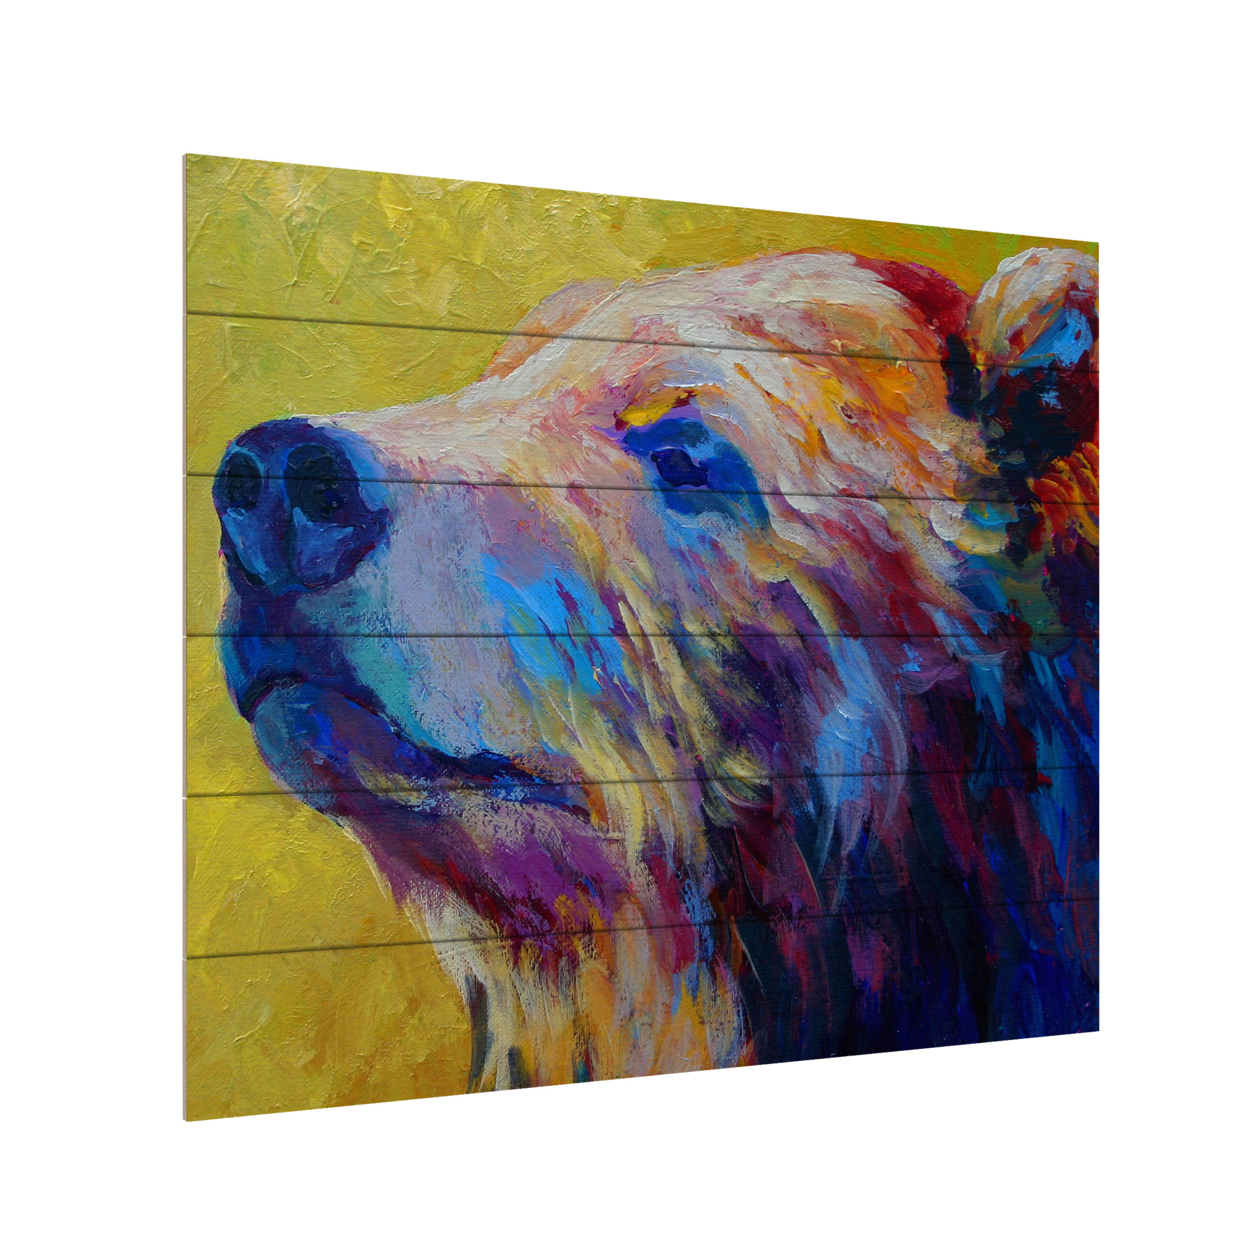 Wooden Slat Art 18 X 22 Inches Titled Pretty Boy Grizz Ready To Hang Home Decor Picture